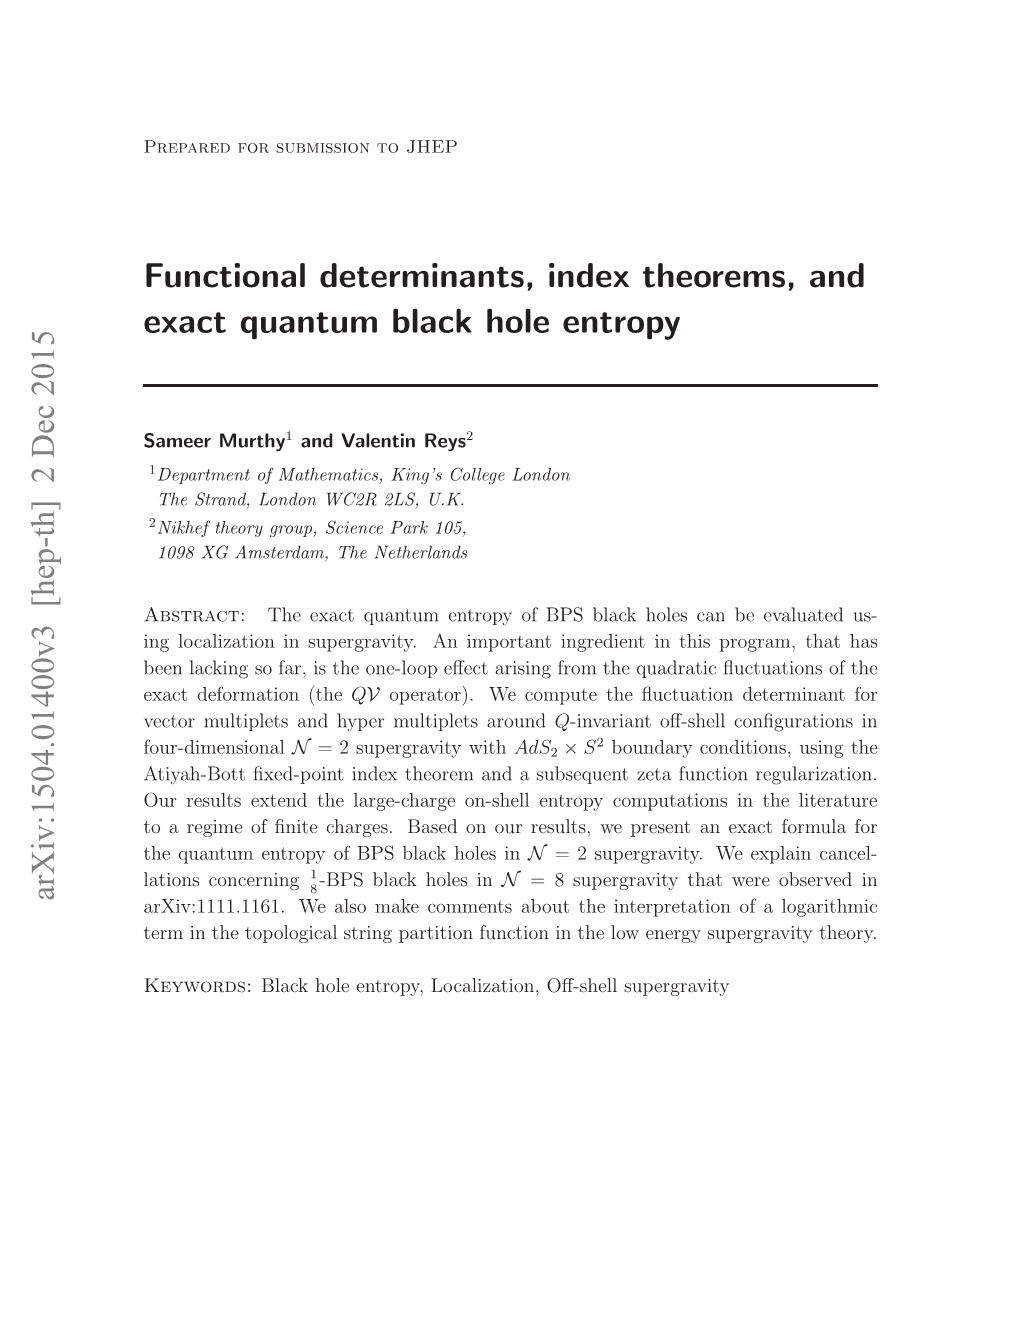 Functional Determinants, Index Theorems, and Exact Quantum Black Hole Entropy